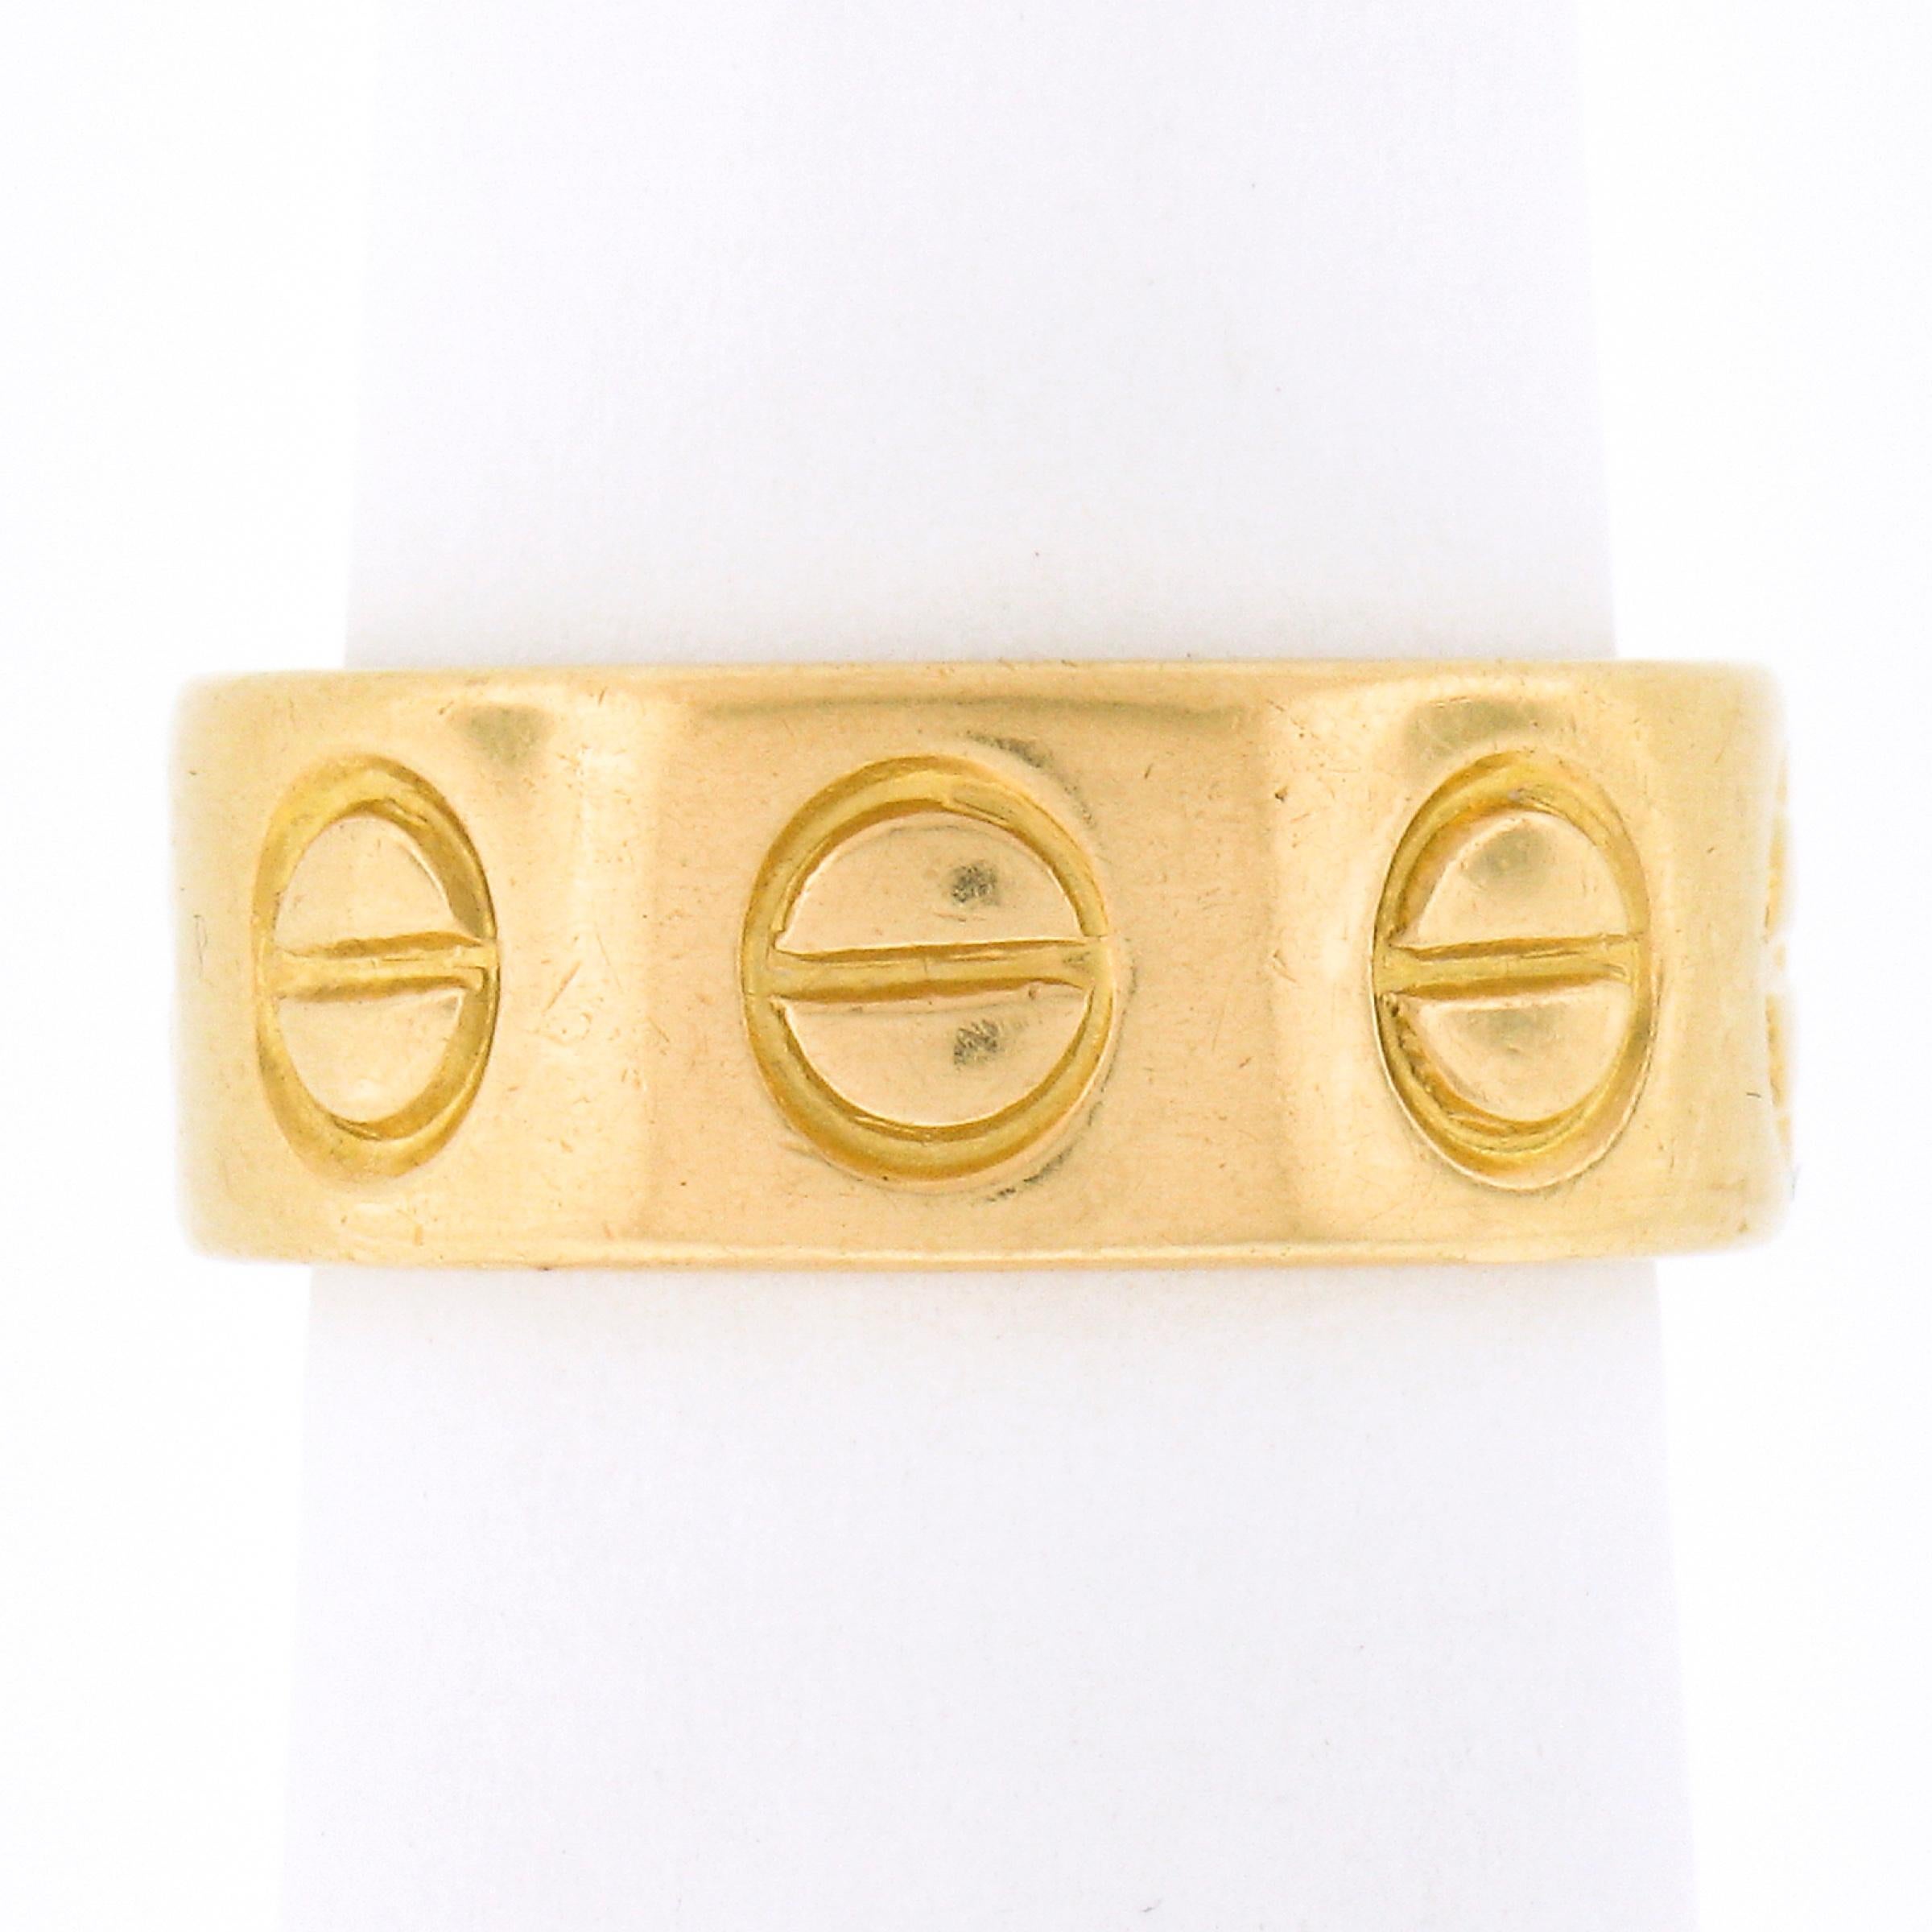 Up for sale is this rare vintage Cartier Love ring crafted in solid 18k yellow gold and signed with their old cursive signature style. This early design features a few more screw motifs than the new Love designed rings. The ring has its original